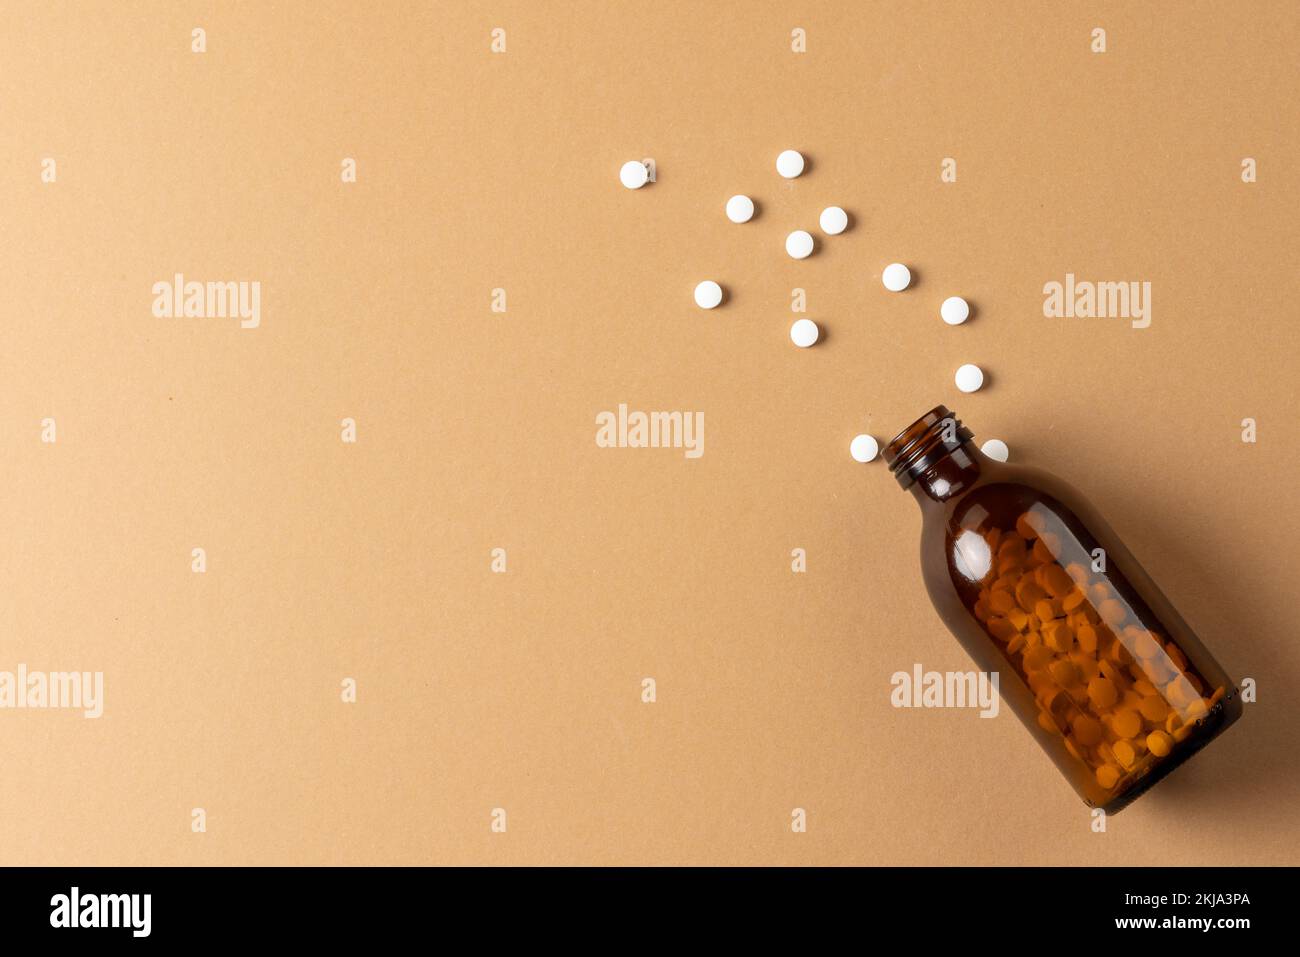 Composition of brown glass pill bottle spilling white pills on brown background with copy space Stock Photo